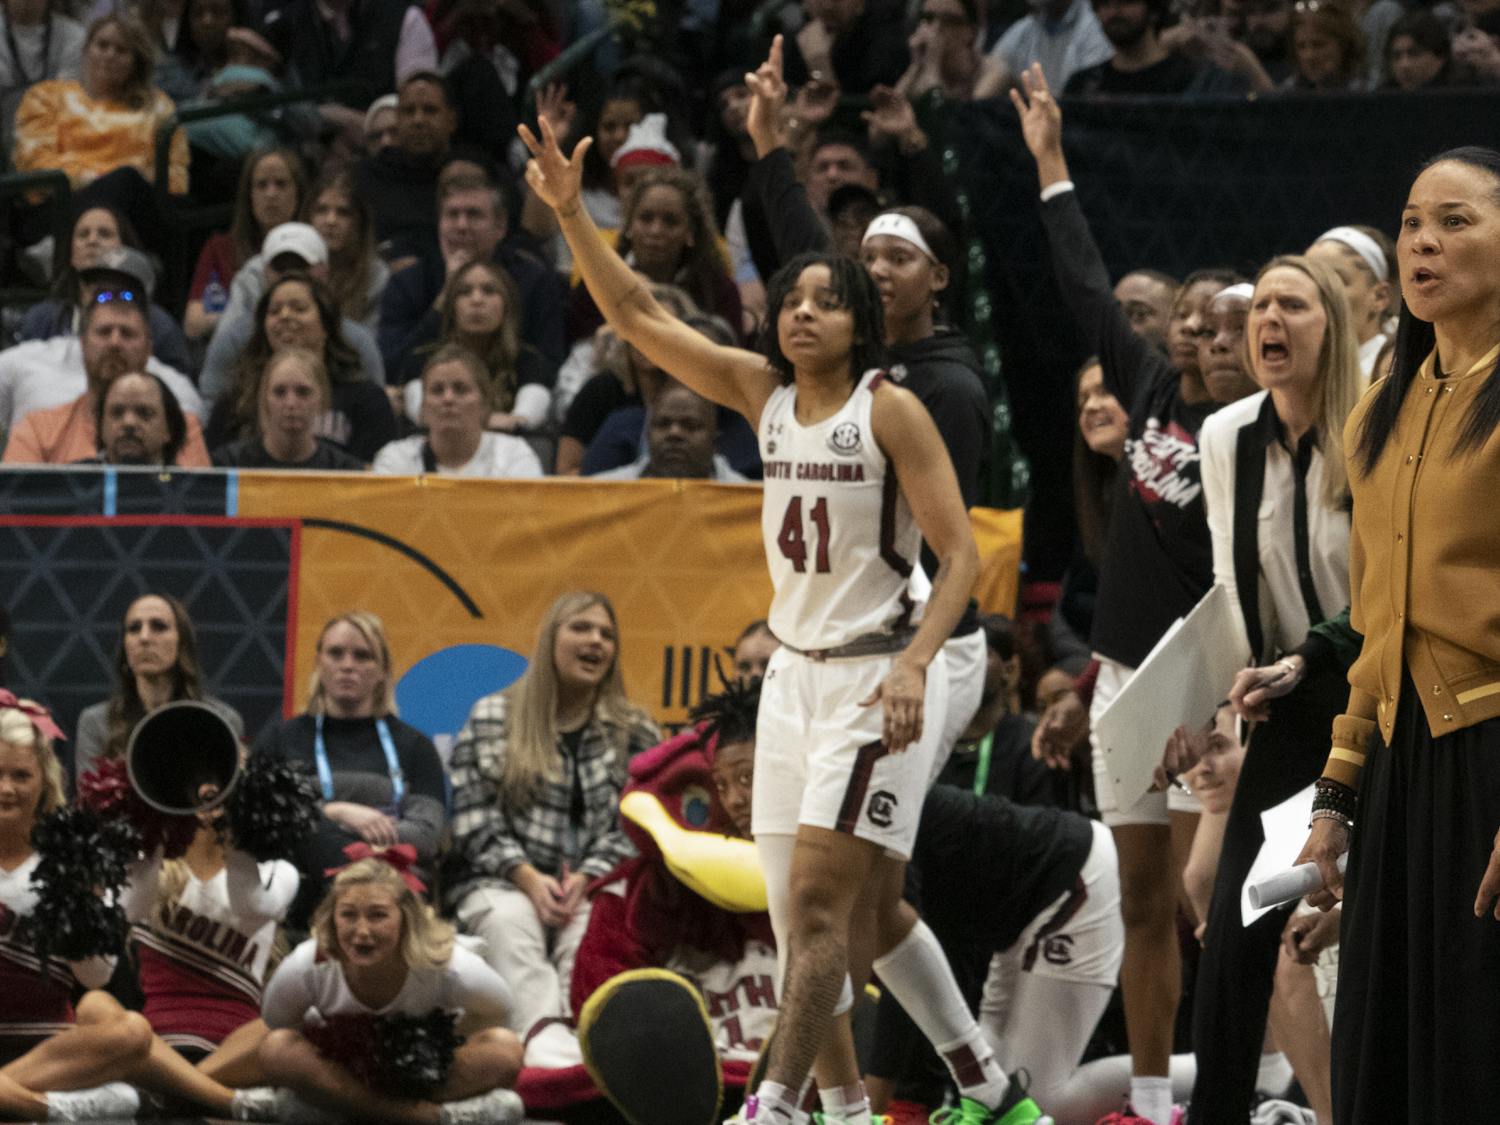 Head coach Dawn Staley and the rest of the Gamecock women’s basketball team rises as Johnson hits her first 3-pointer of the night against the University of Iowa at the Final Four match on March 31, 2023. Iowa led 59-55 at the end of the third quarter.&nbsp;